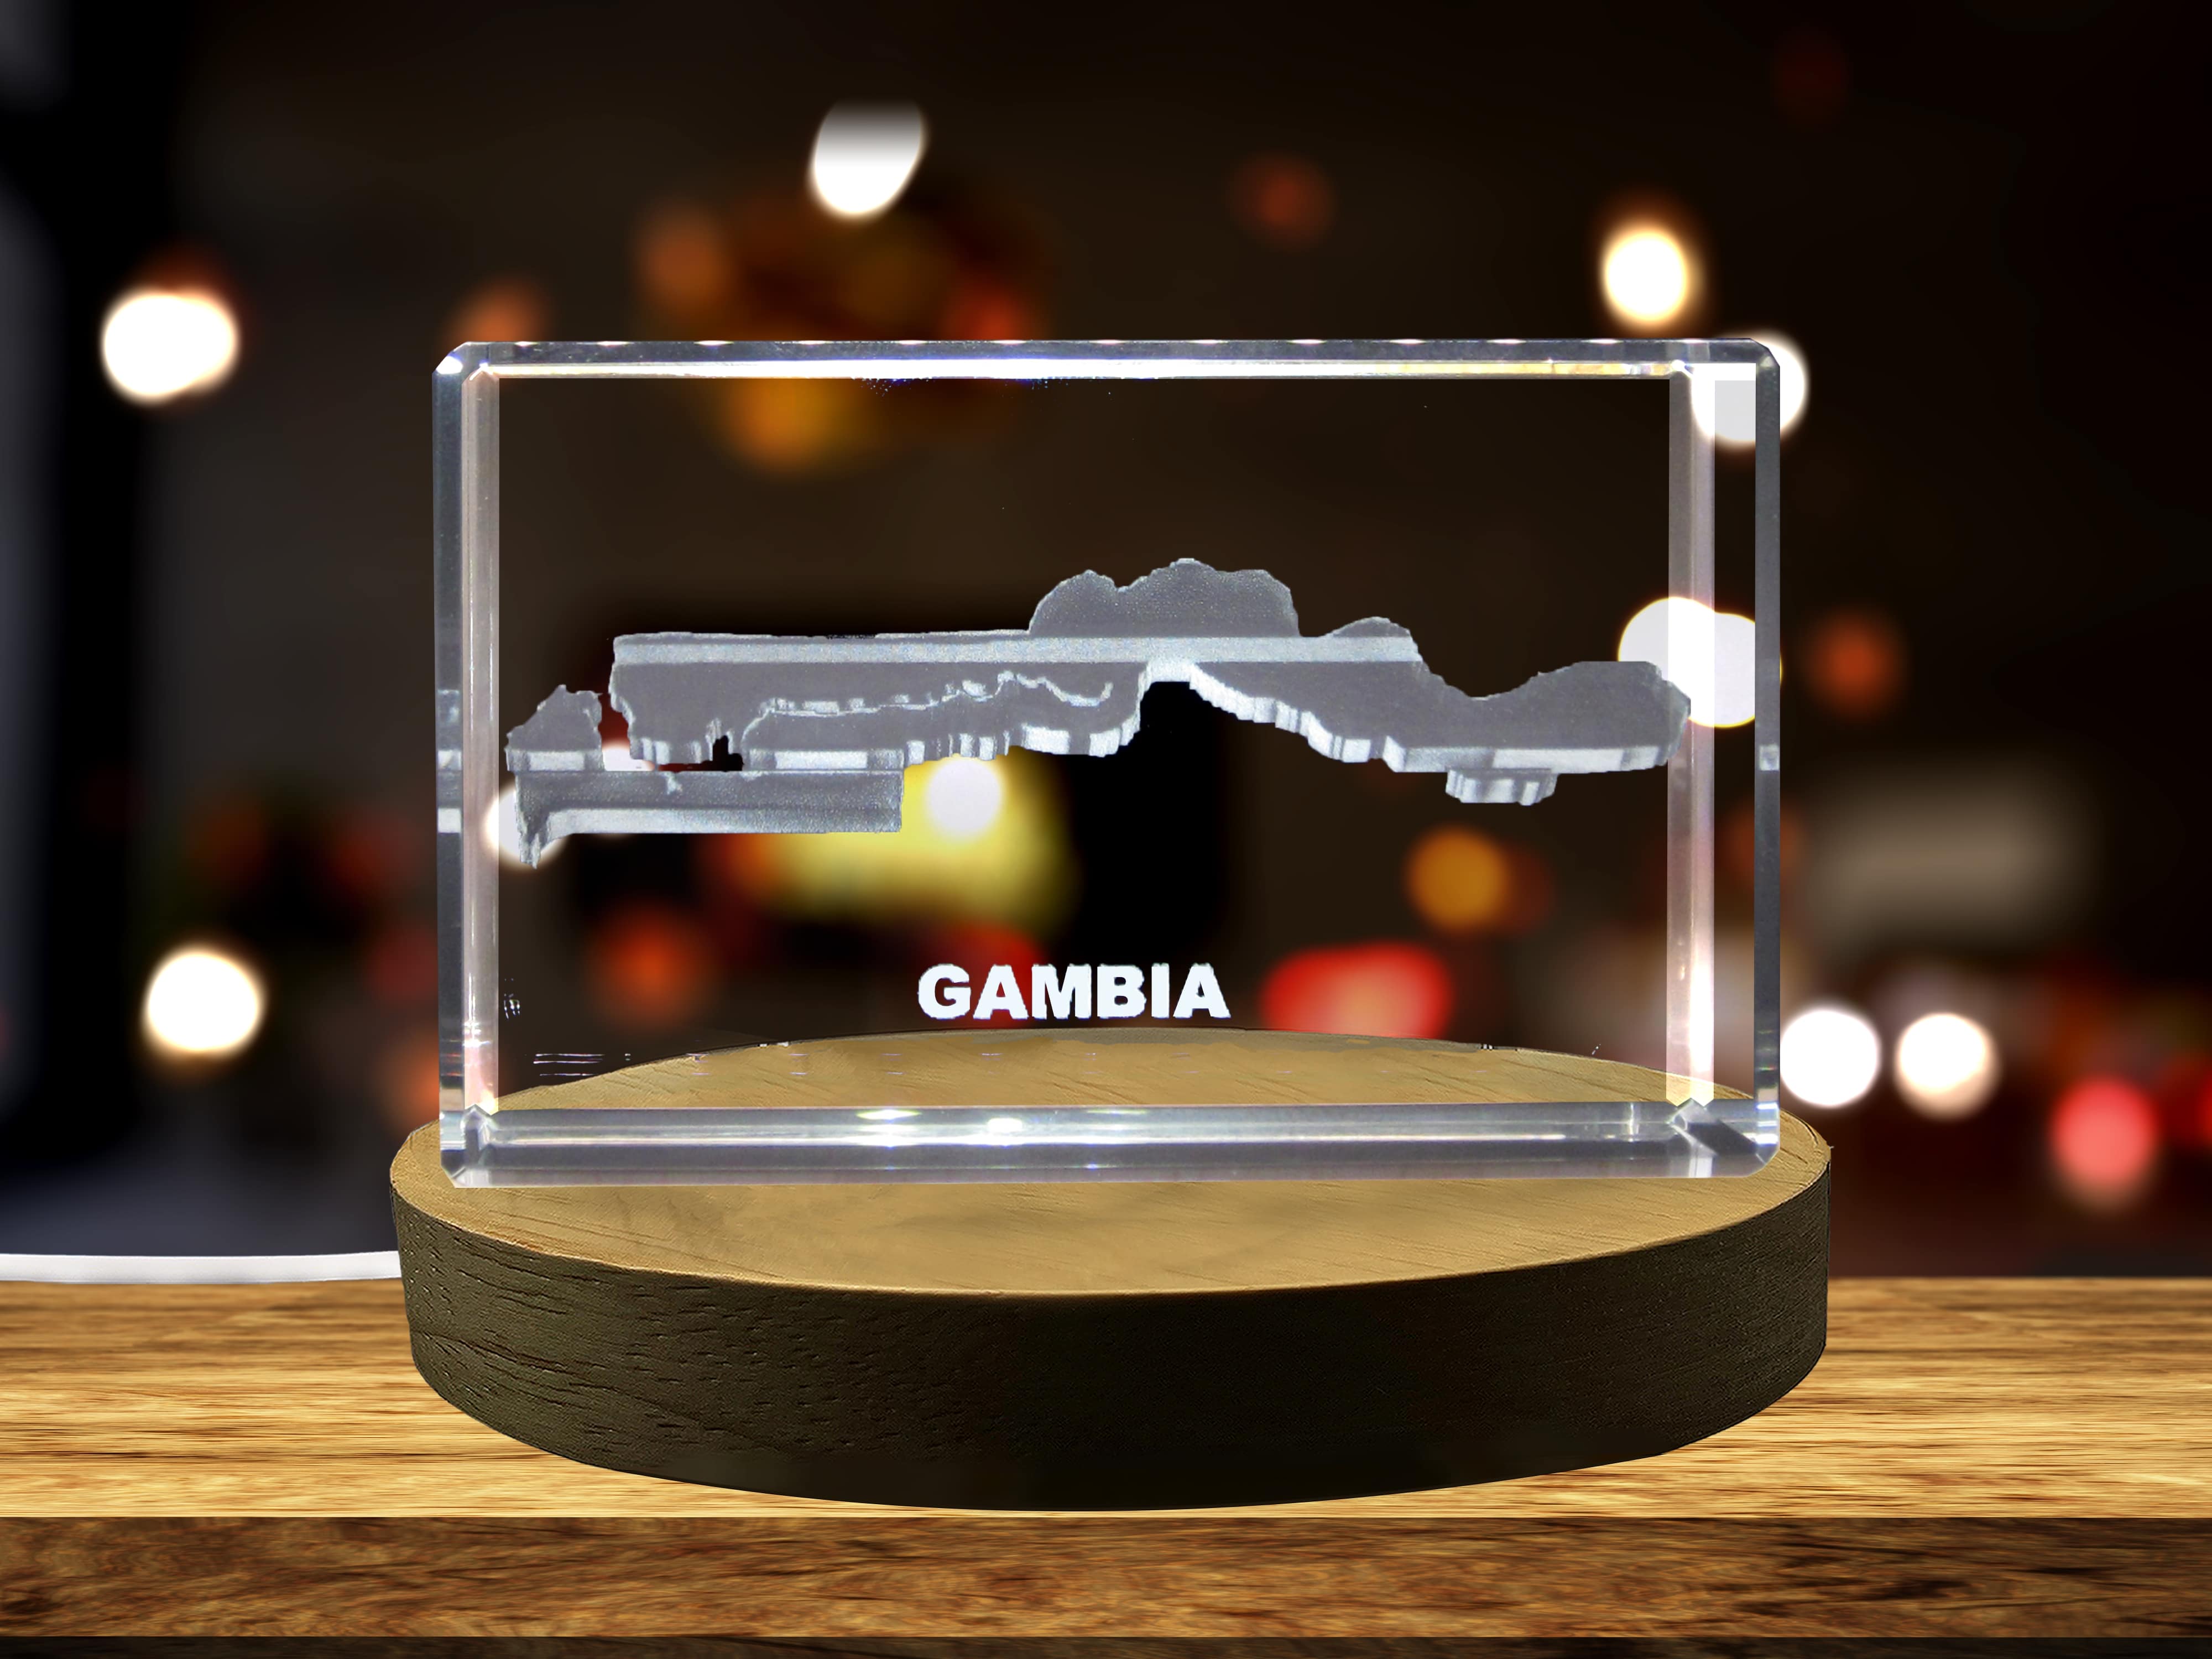 Gambia 3D Engraved Crystal 3D Engraved Crystal Keepsake/Gift/Decor/Collectible/Souvenir A&B Crystal Collection